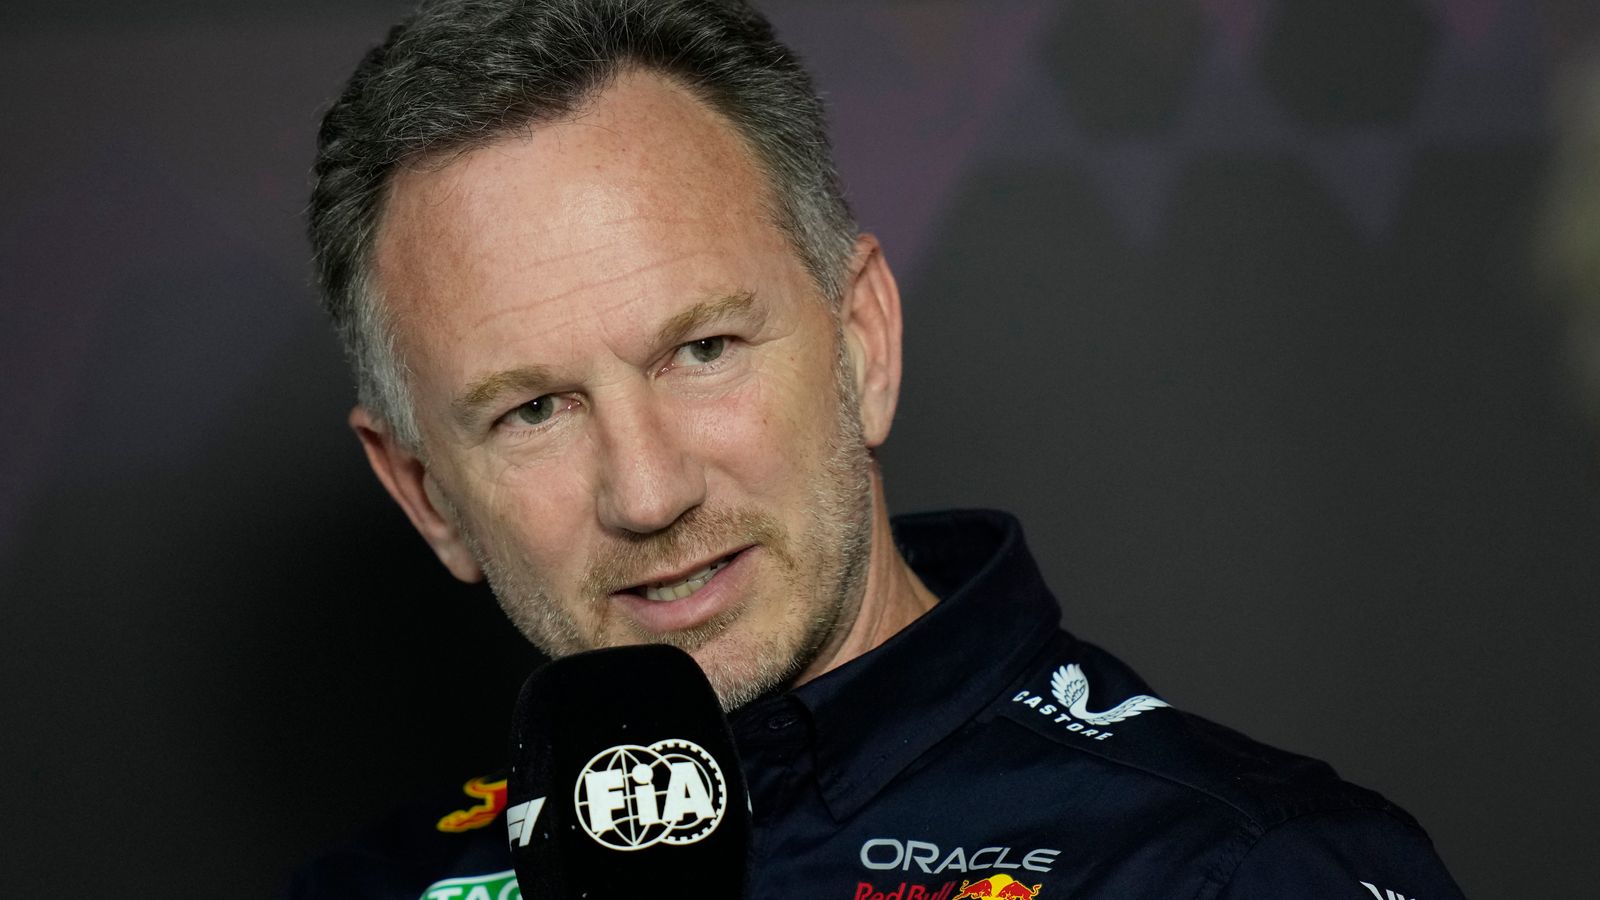 Christian Horner: Formula 1 boss's accuser appeals decision to clear Red Bull boss of misconduct